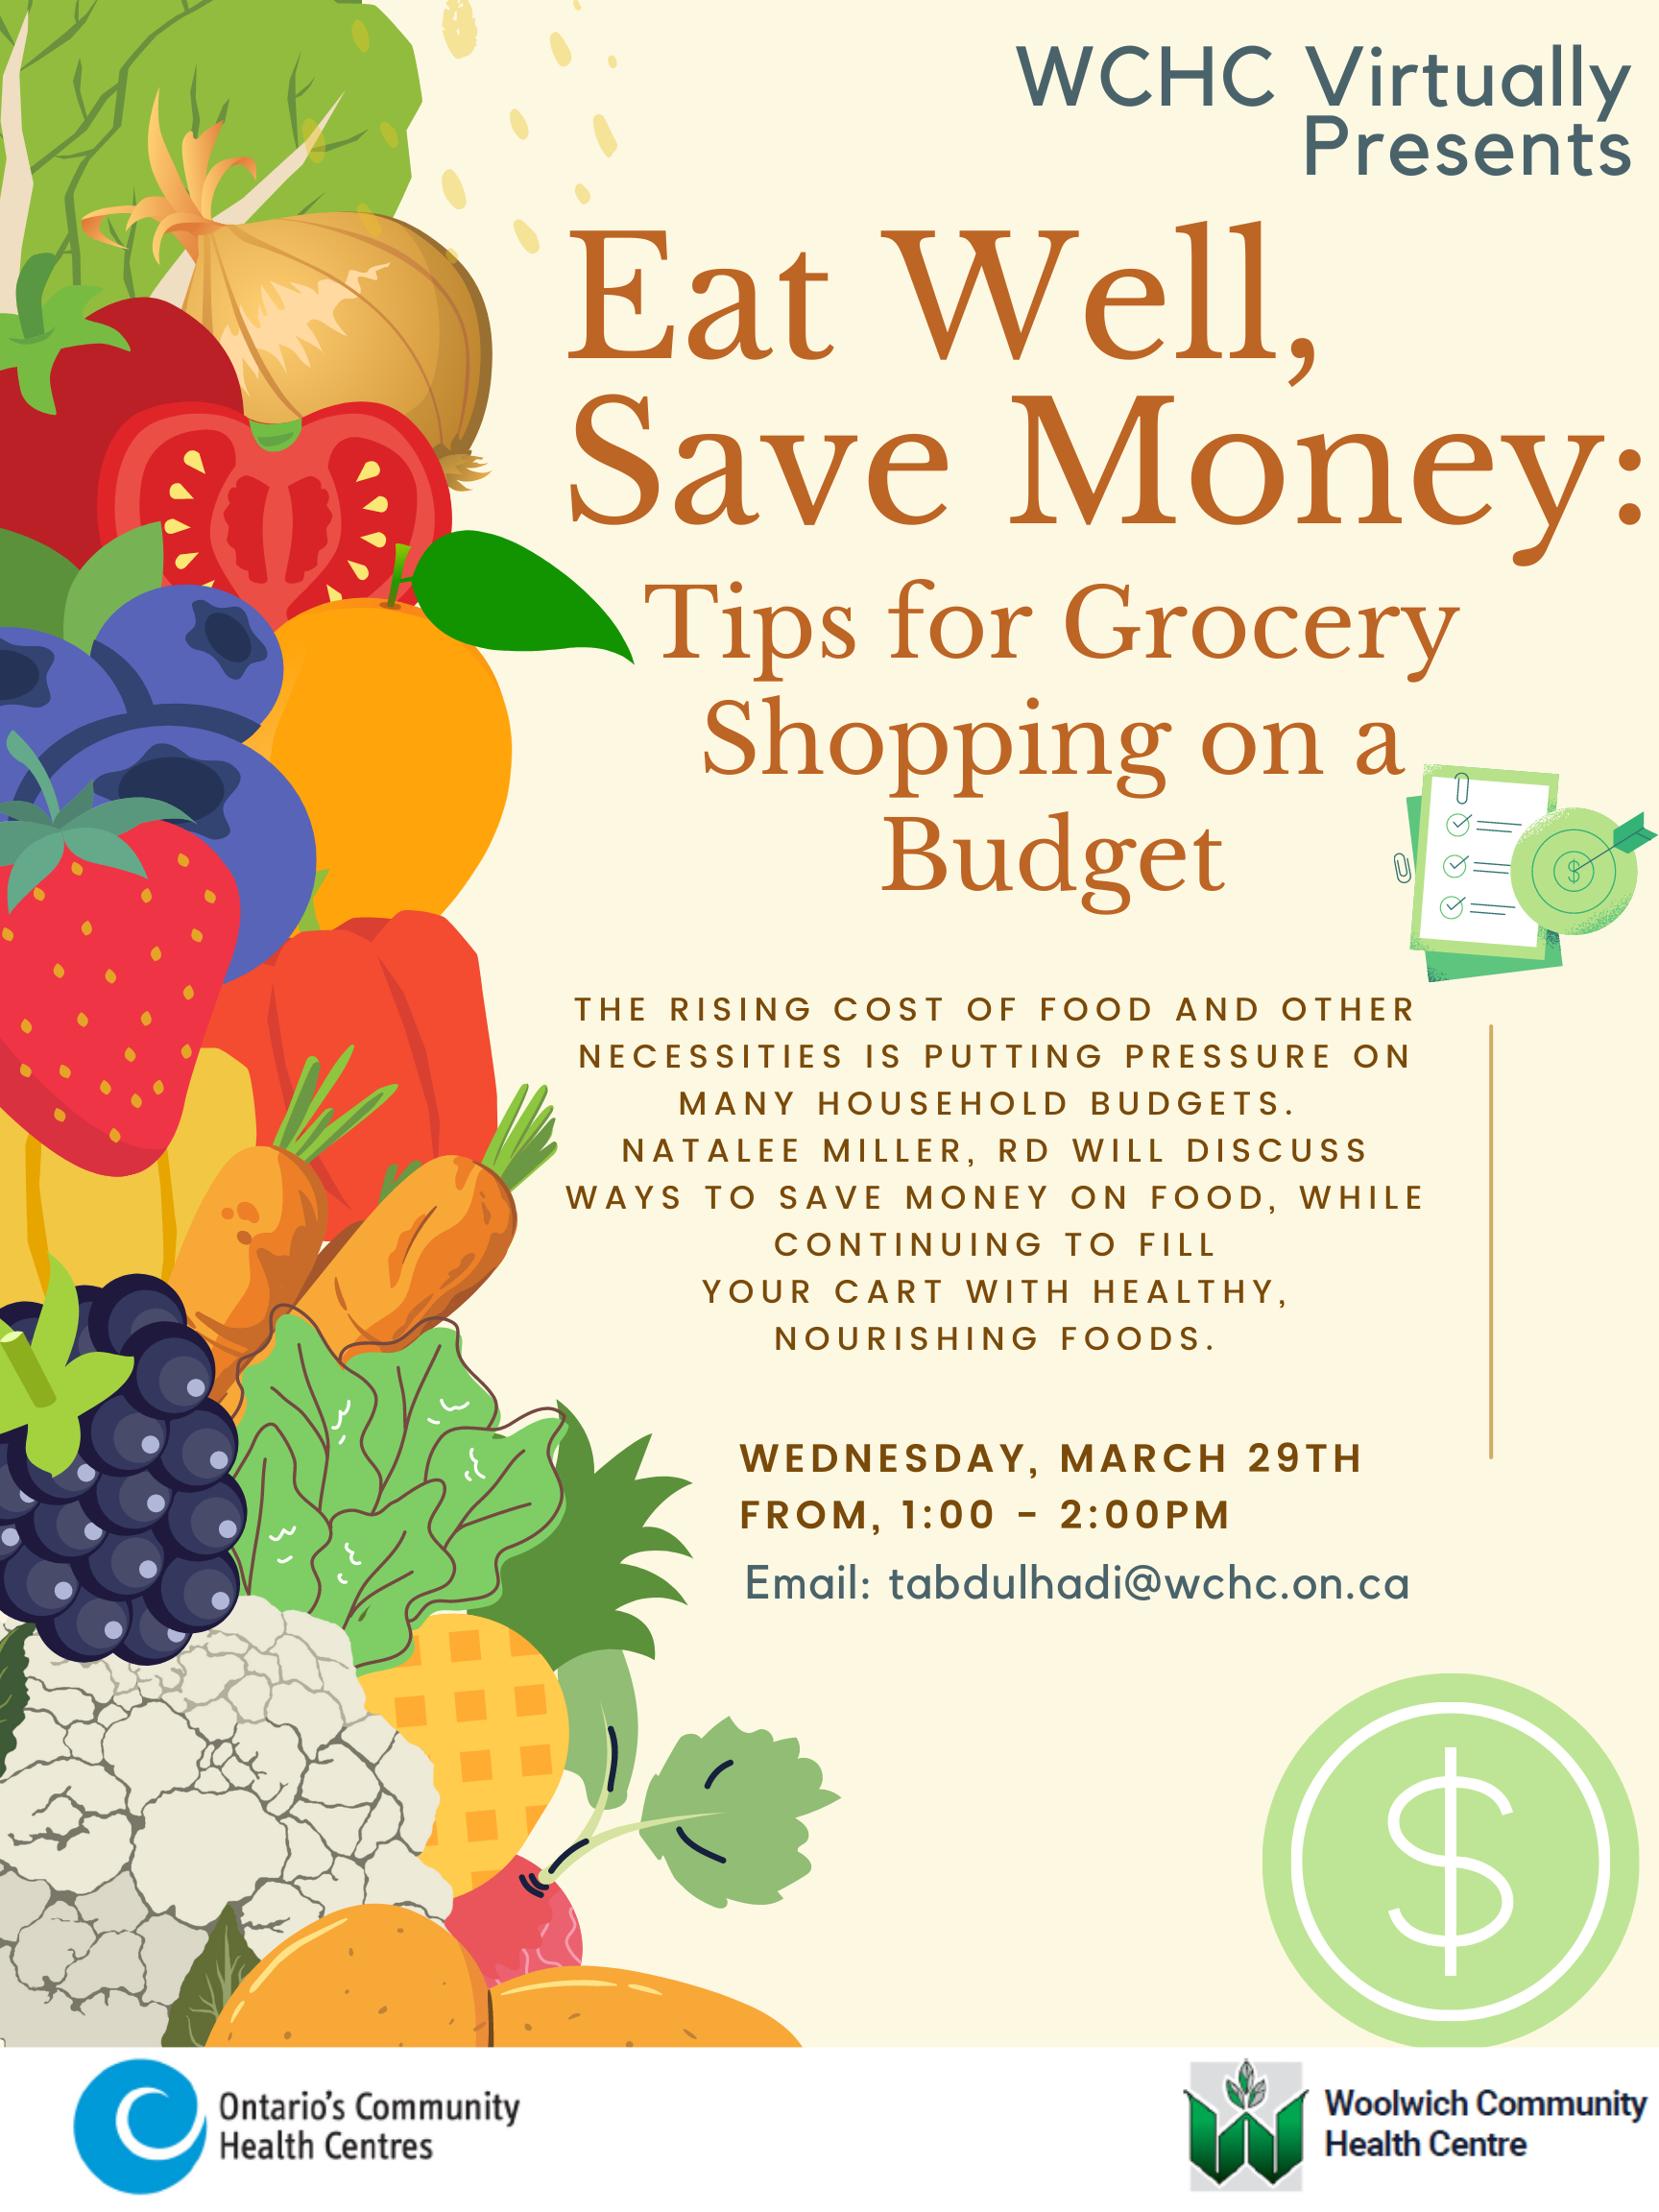 Eat Well, Save Money: Tips for Grocery Shopping on a Budget